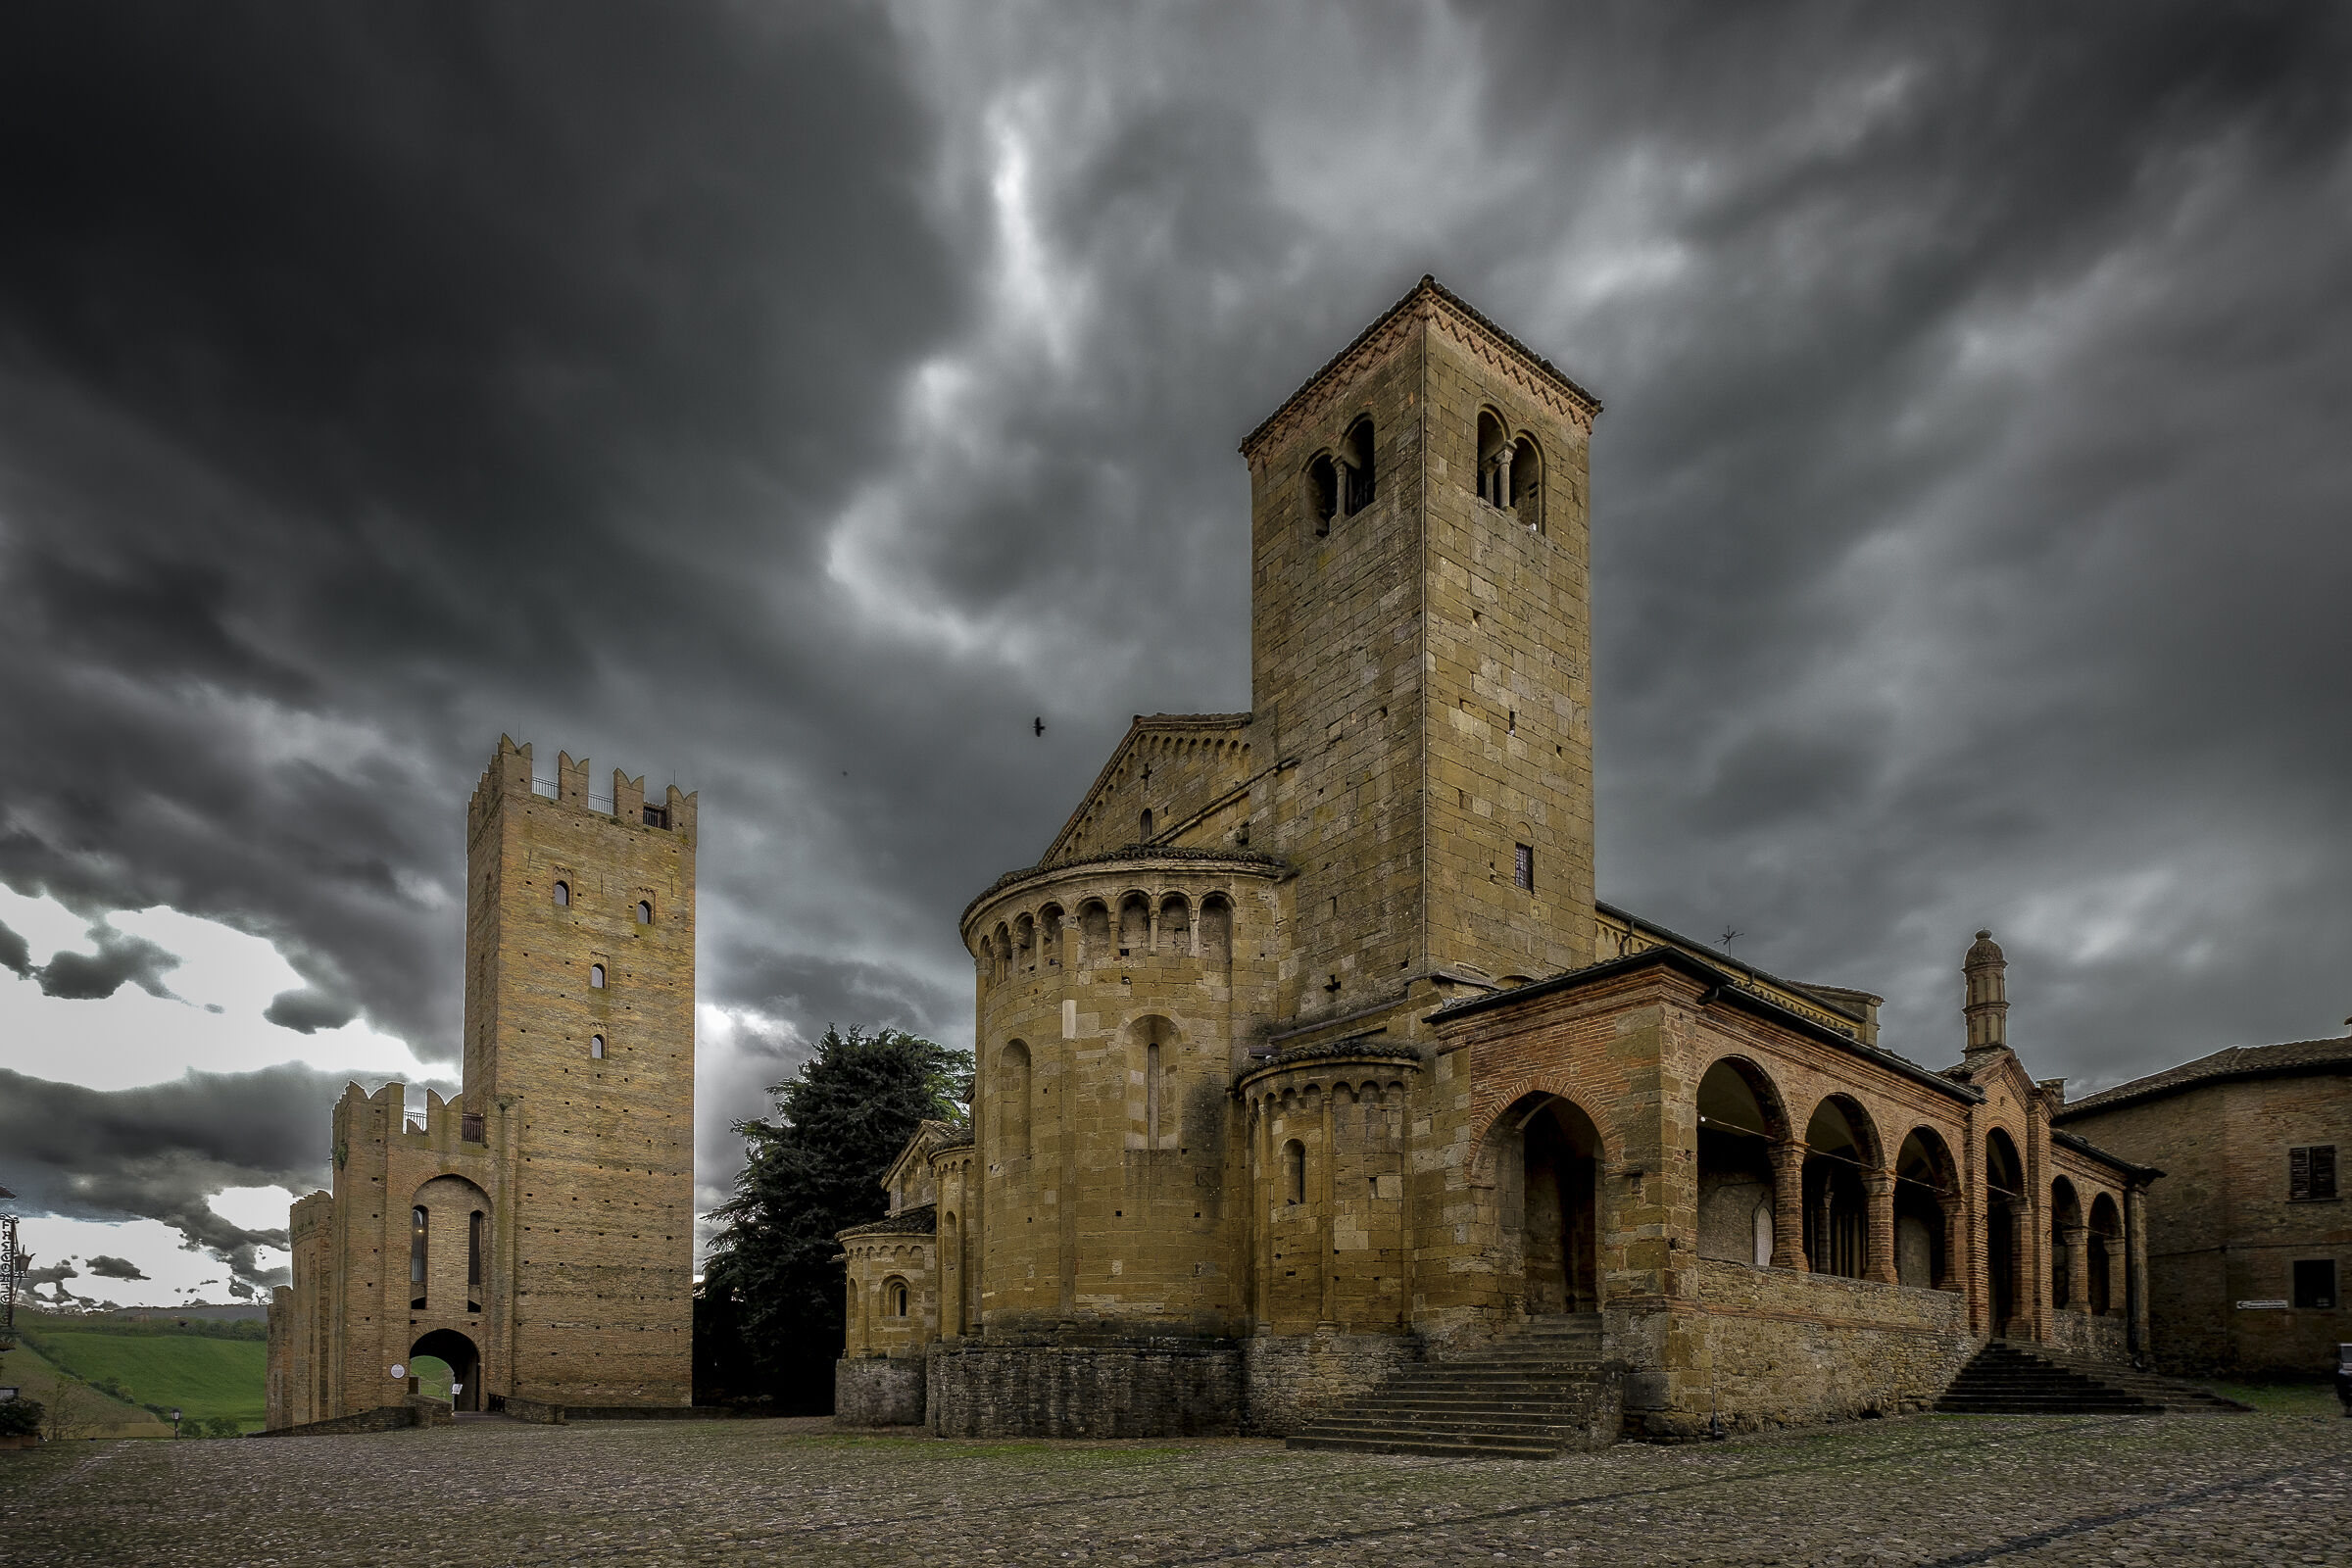 Castell'Arquato just before the storm...